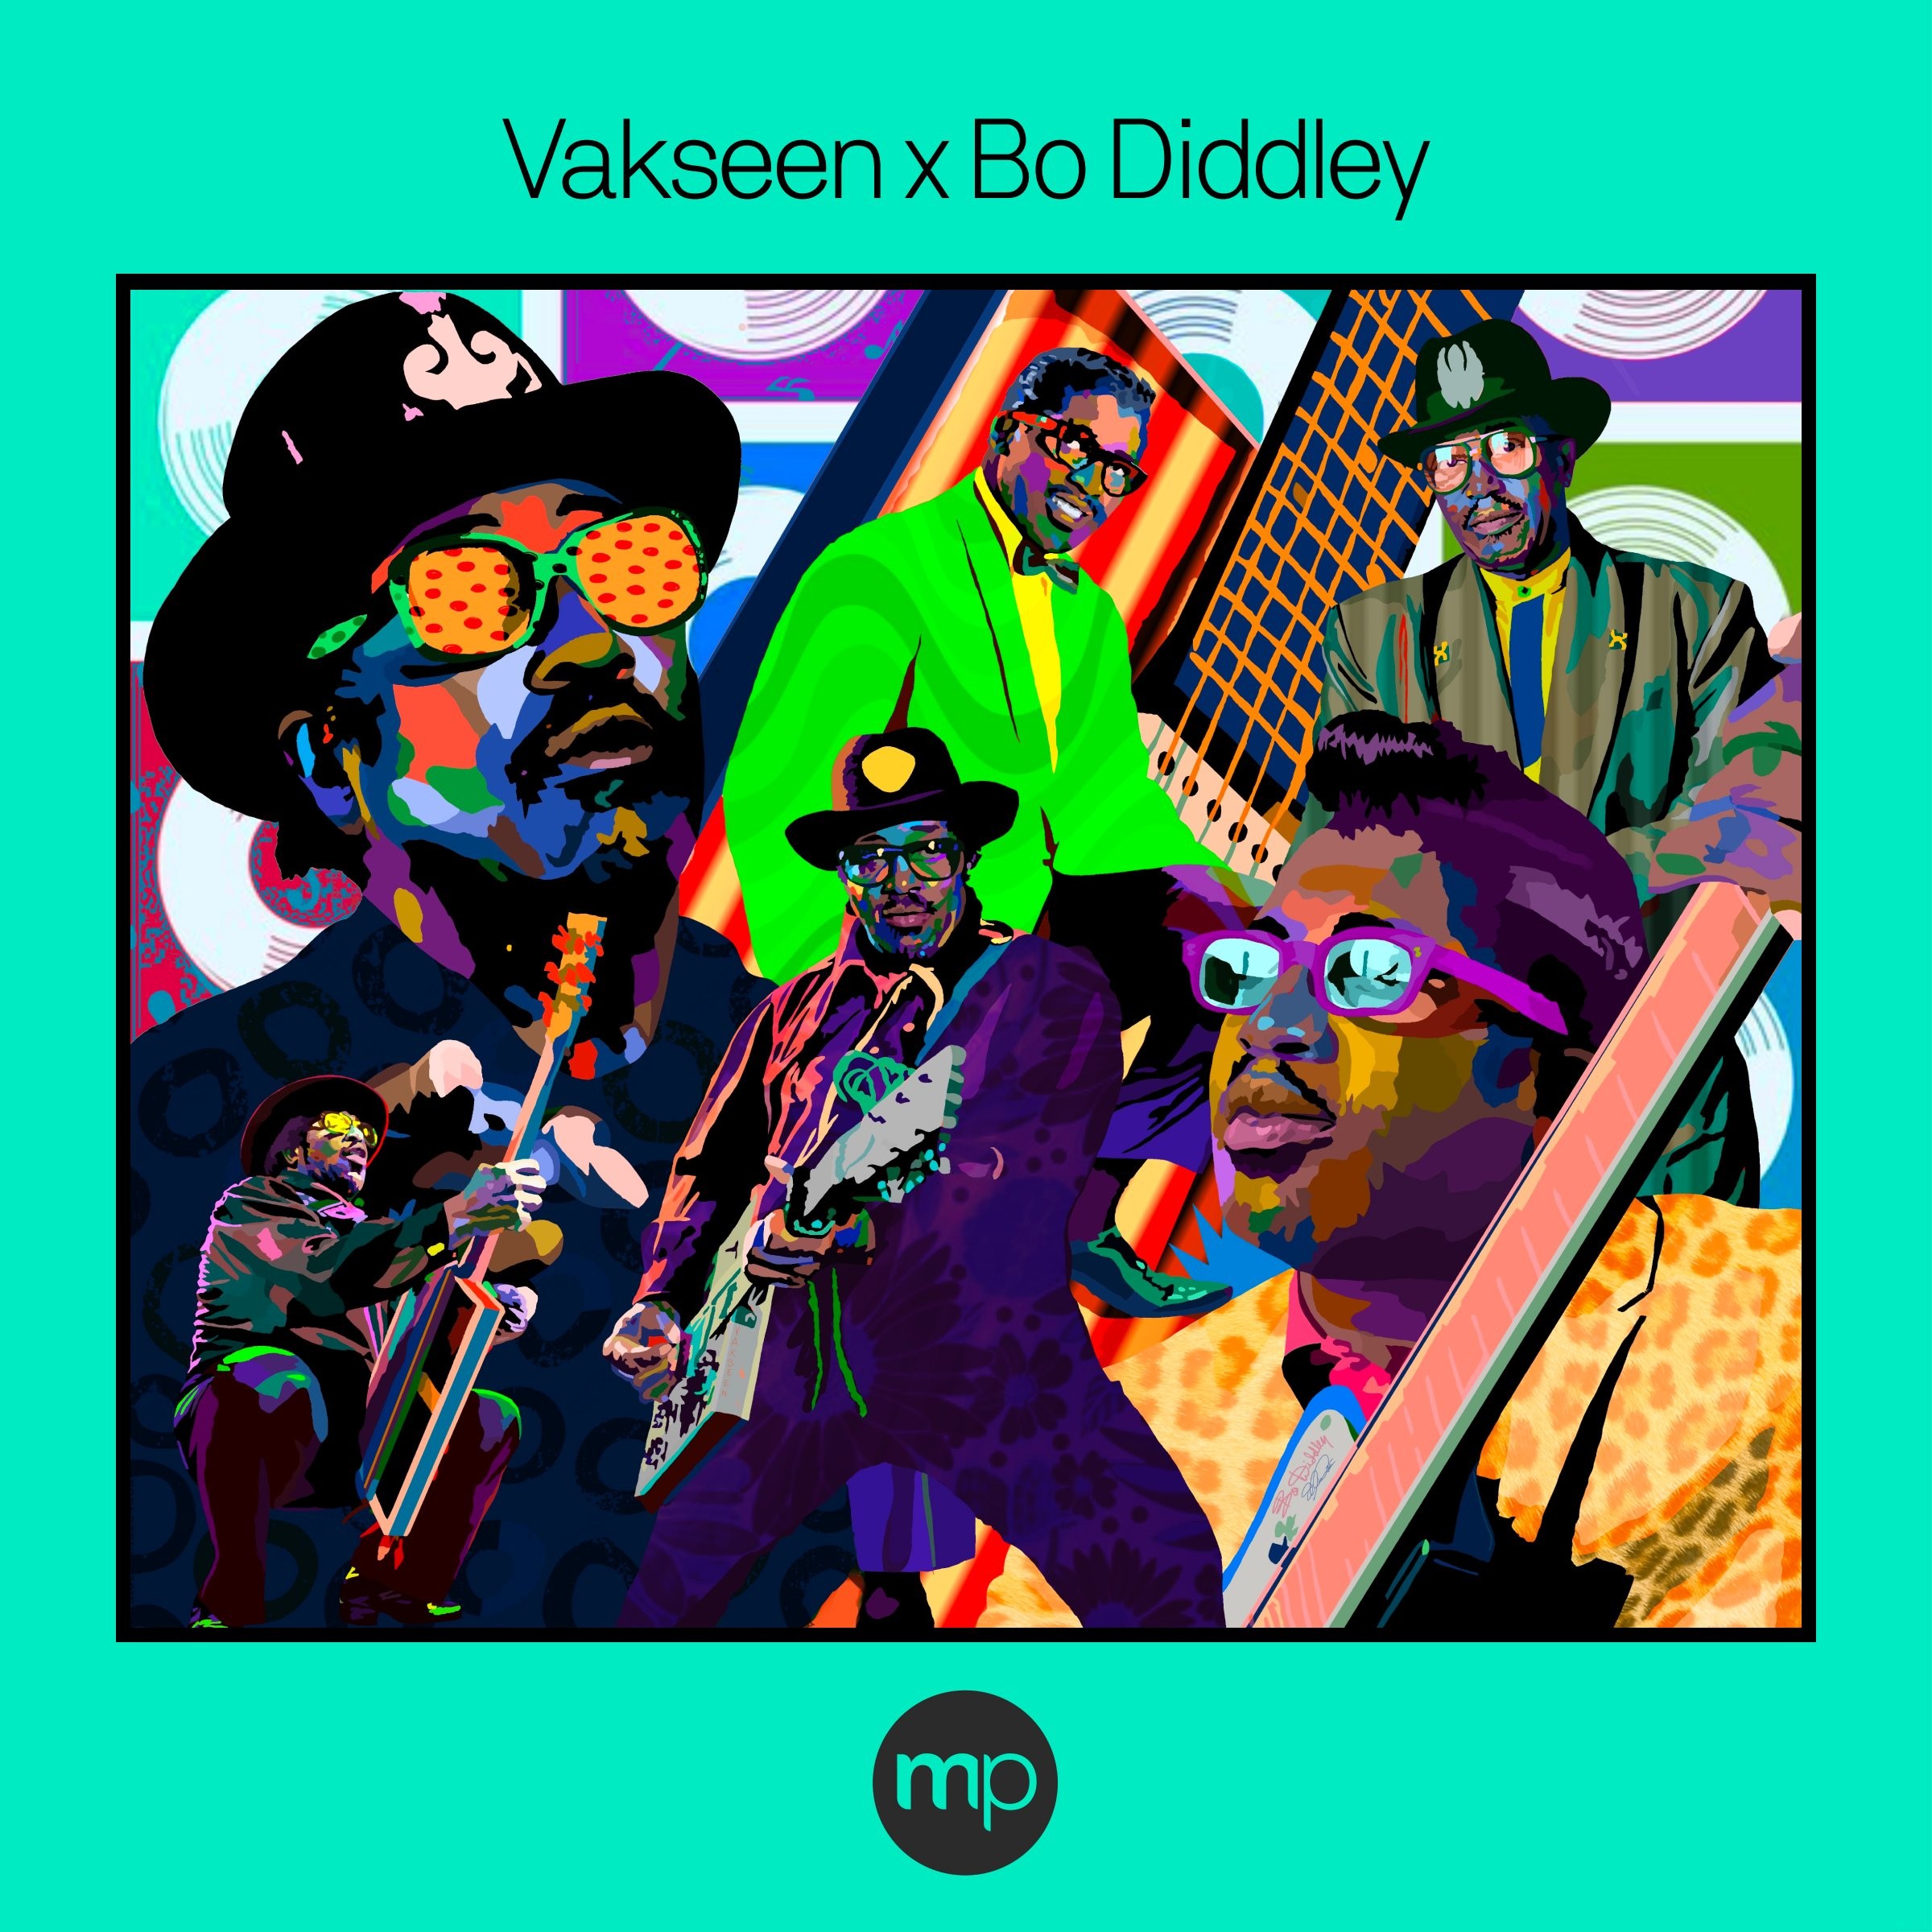 Bo Diddley Estate x Makersplace “You Don’t Know Diddley” NFT Drop Releasing January 26th